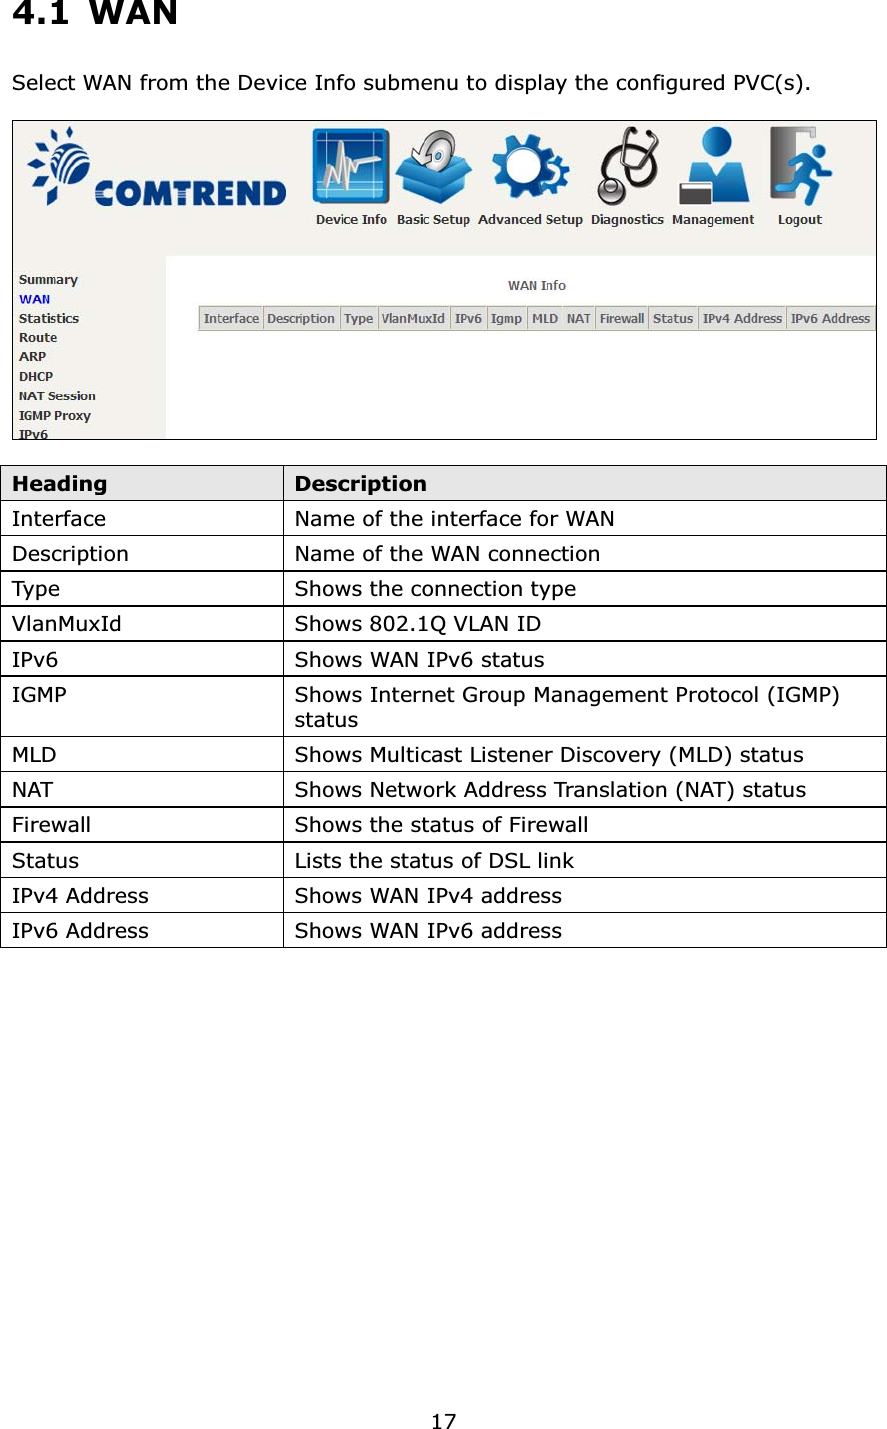 174.1 WANSelect WAN from the Device Info submenu to display the configured PVC(s).HeadingDescriptionInterface  Name of the interface for WANDescription Name of the WAN connectionType Shows the connection type VlanMuxId Shows 802.1Q VLAN IDIPv6 Shows WAN IPv6 statusIGMP Shows Internet Group Management Protocol (IGMP) statusMLD Shows Multicast Listener Discovery (MLD) statusNAT Shows Network Address Translation (NAT) statusFirewall Shows the status of FirewallStatus Lists the status of DSL linkIPv4 Address Shows WAN IPv4 addressIPv6 Address Shows WAN IPv6 address